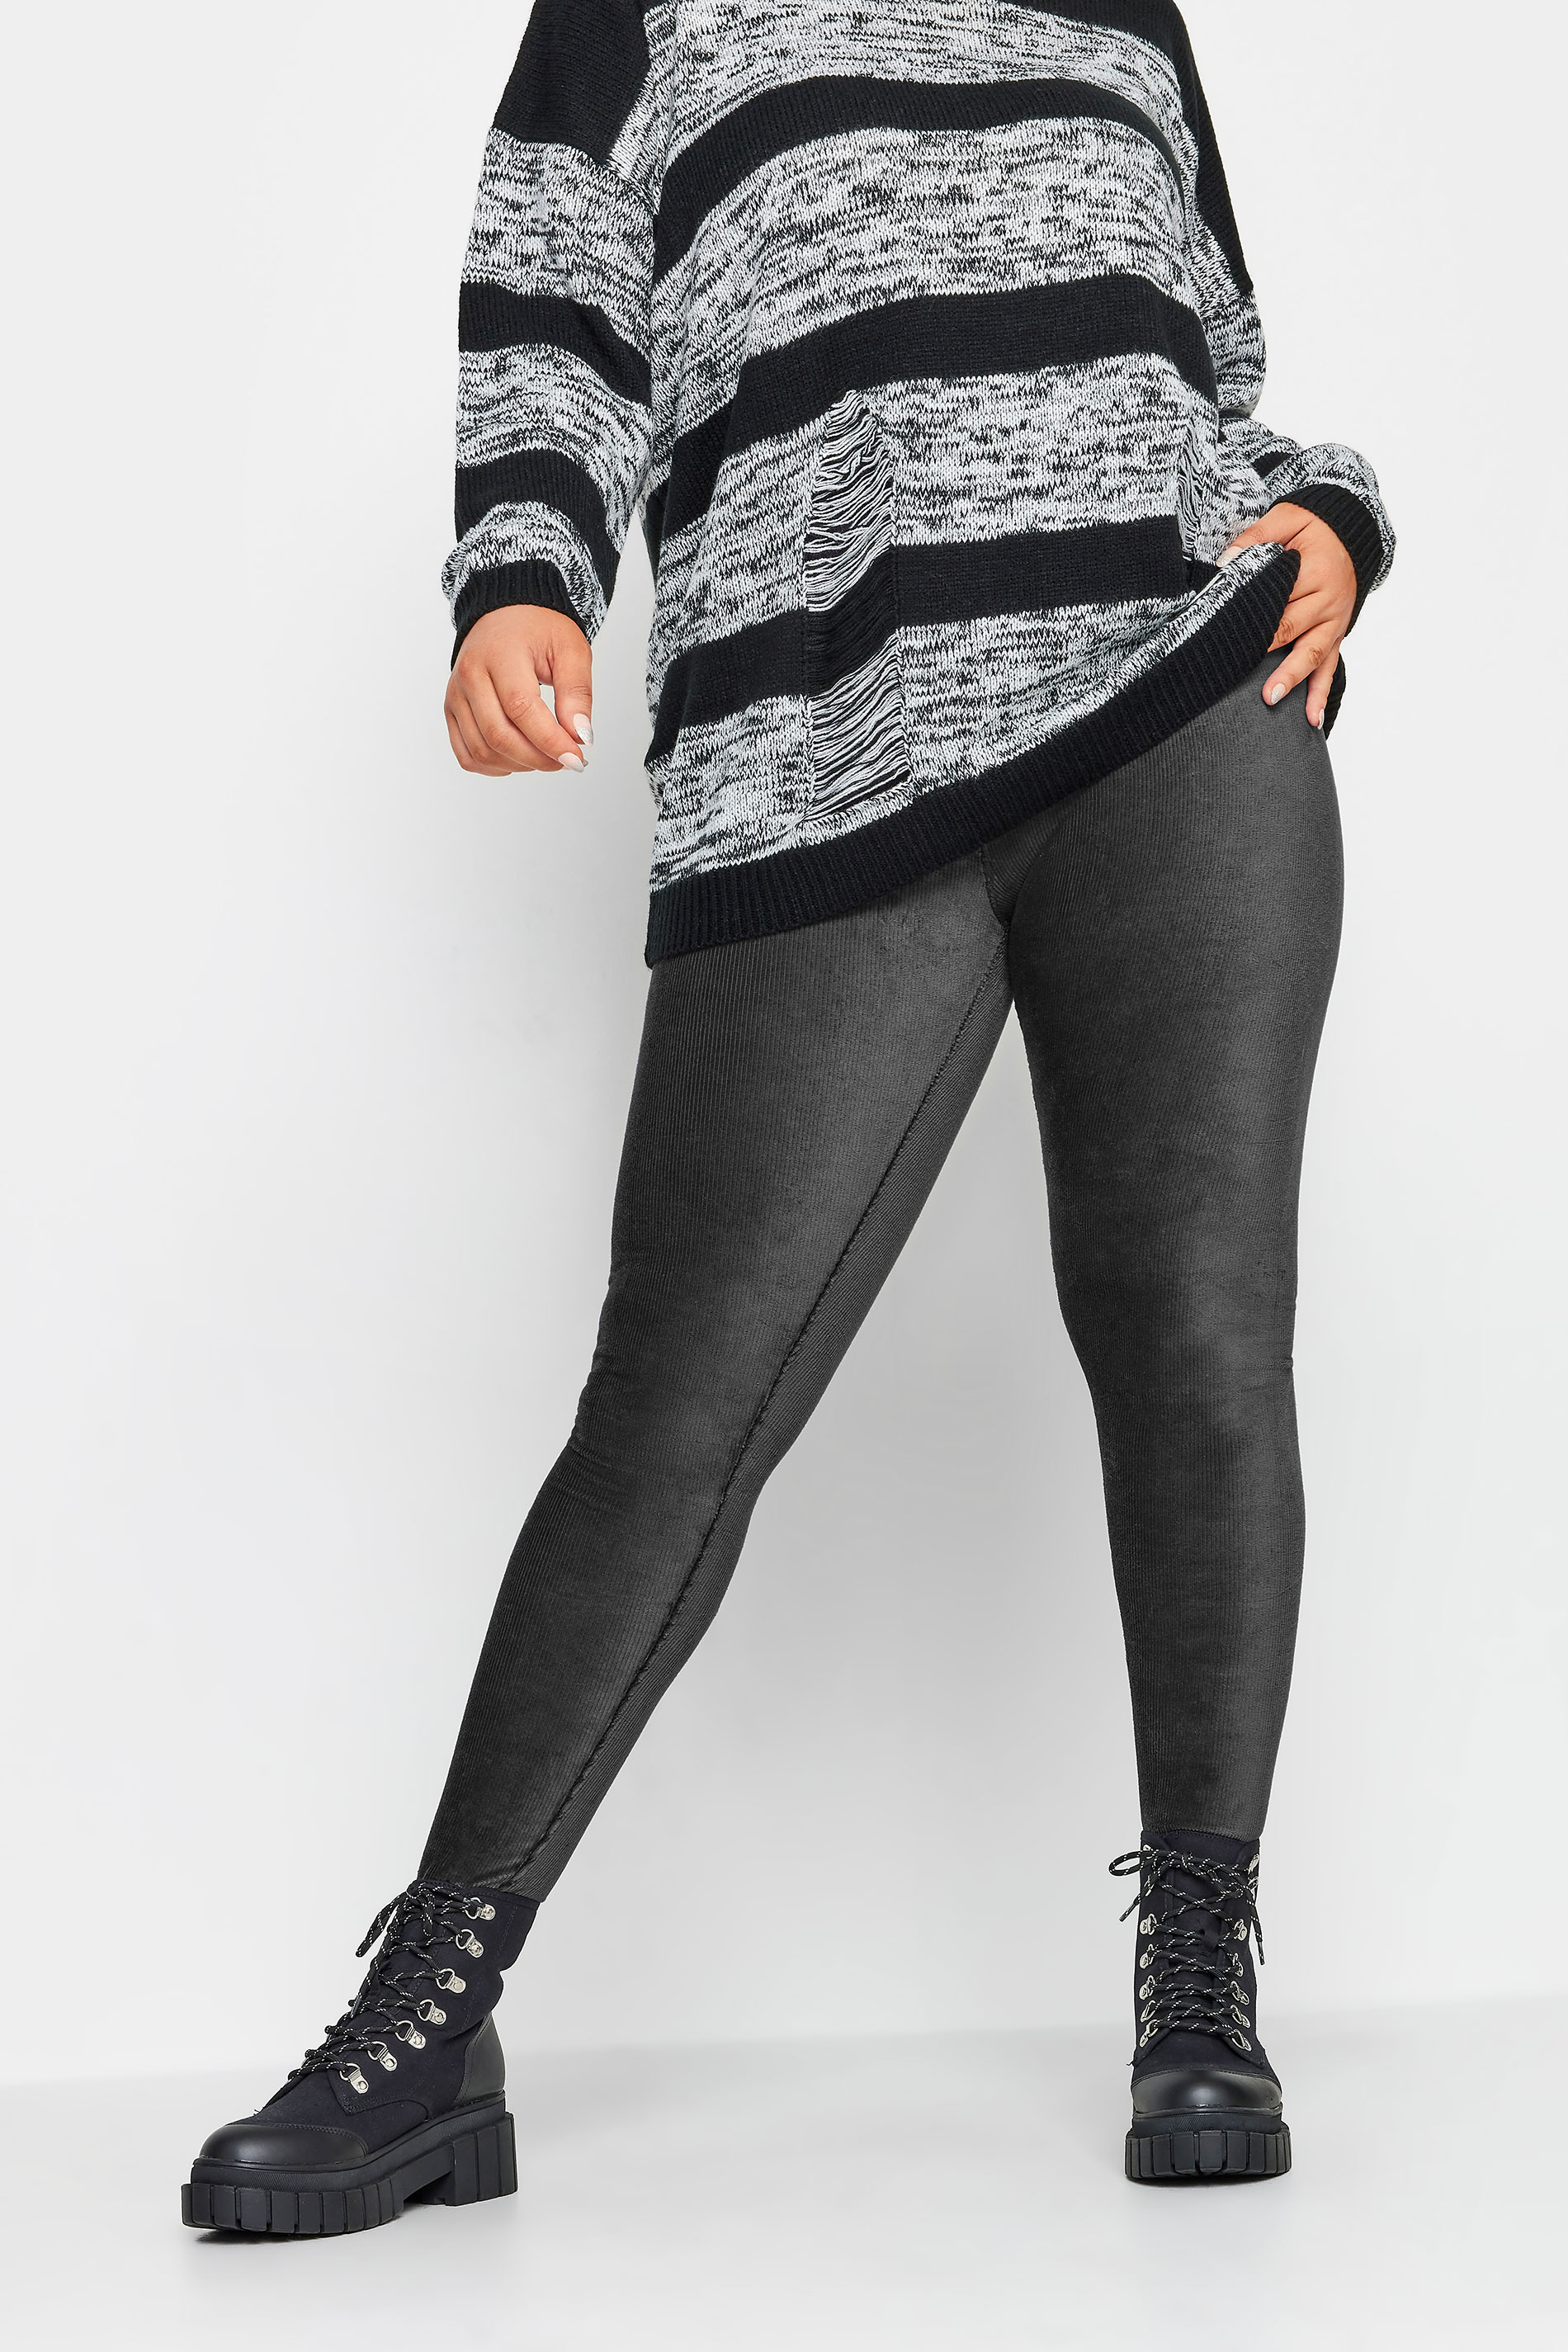 YOURS Plus Size Charcoal Grey Cord Leggings | Yours Clothing 1